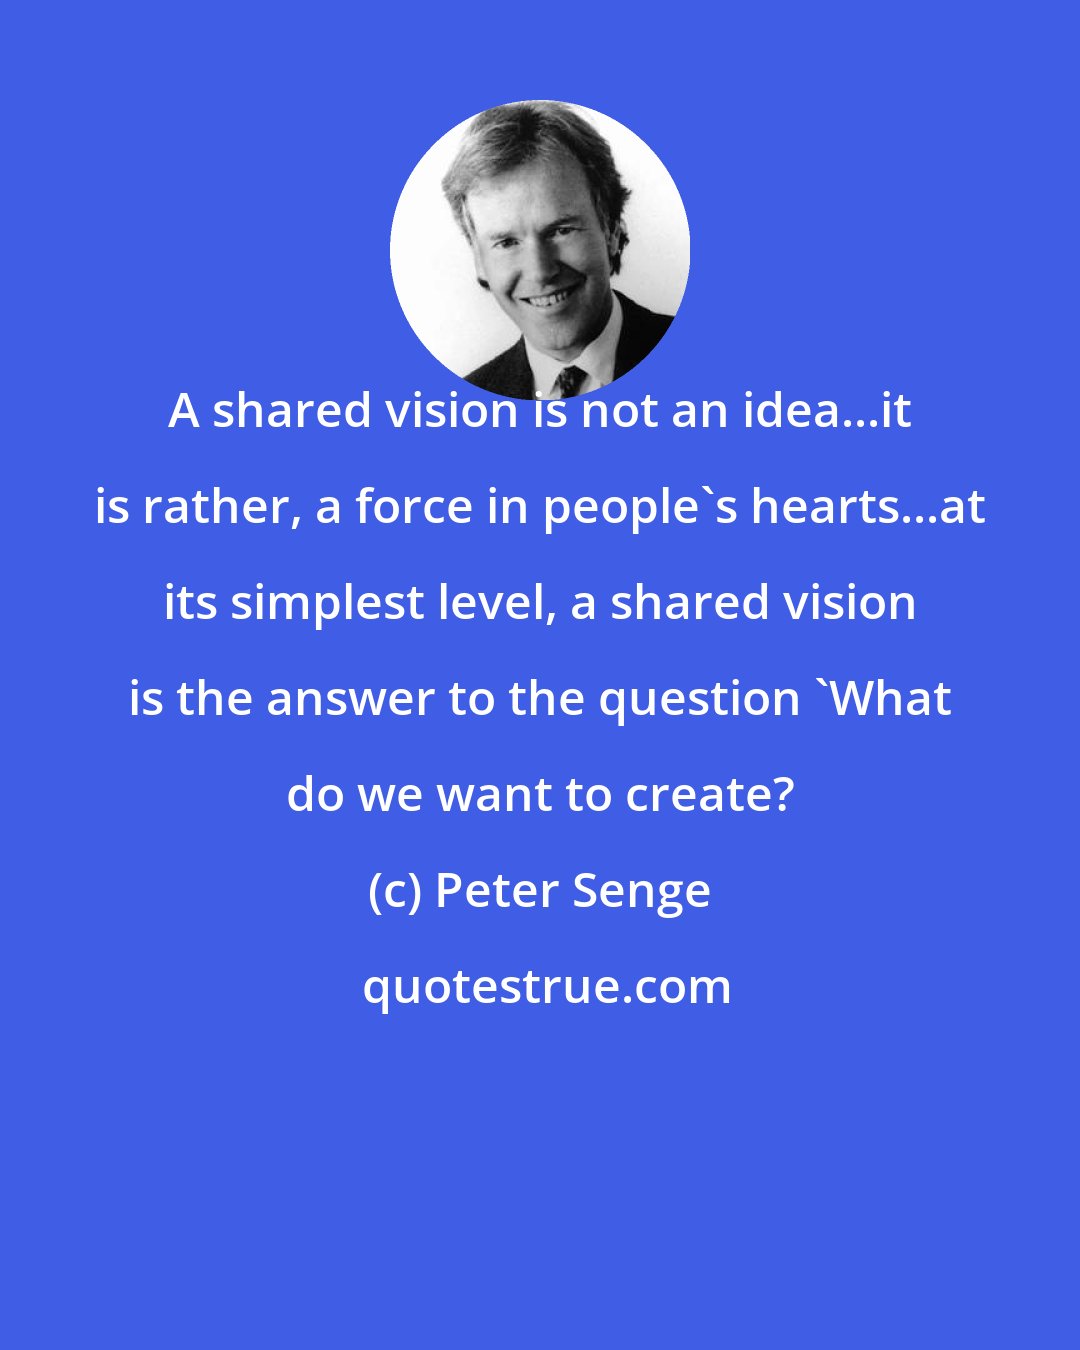 Peter Senge: A shared vision is not an idea...it is rather, a force in people's hearts...at its simplest level, a shared vision is the answer to the question 'What do we want to create?